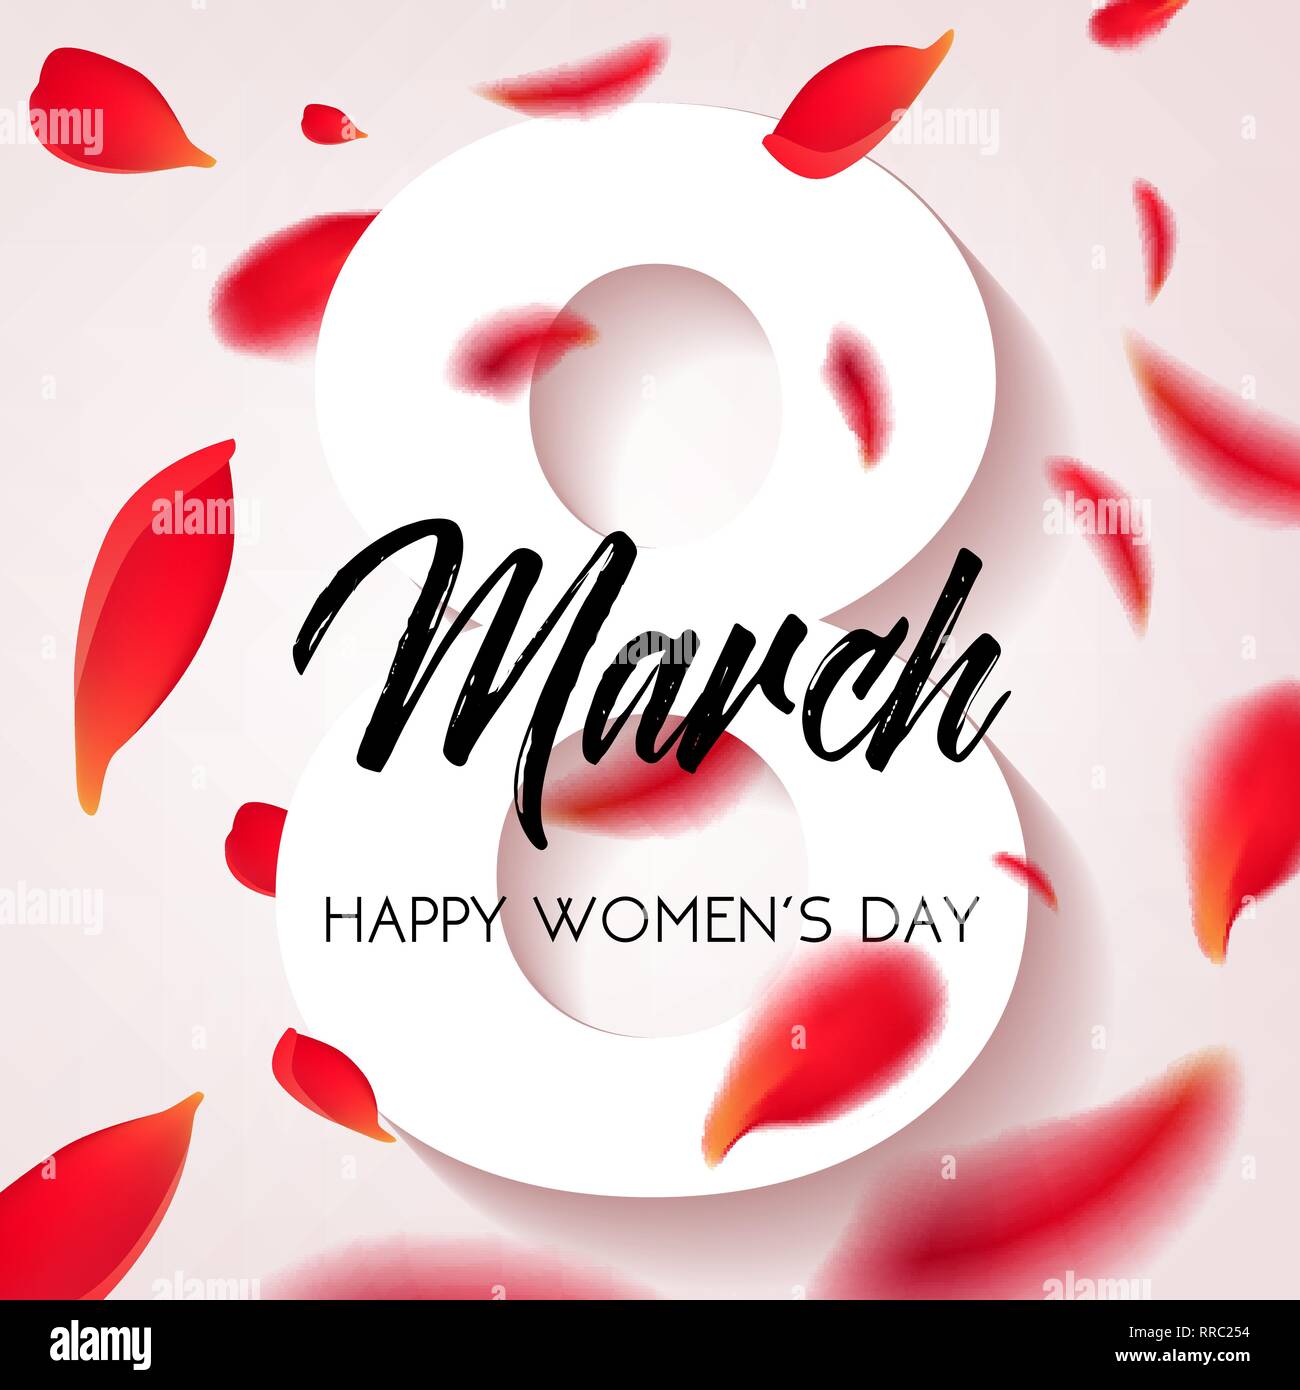 Happy Womens Day - March 8, congratulatory banner with petals of red roses on a white background. Vector illustration. Stock Vector